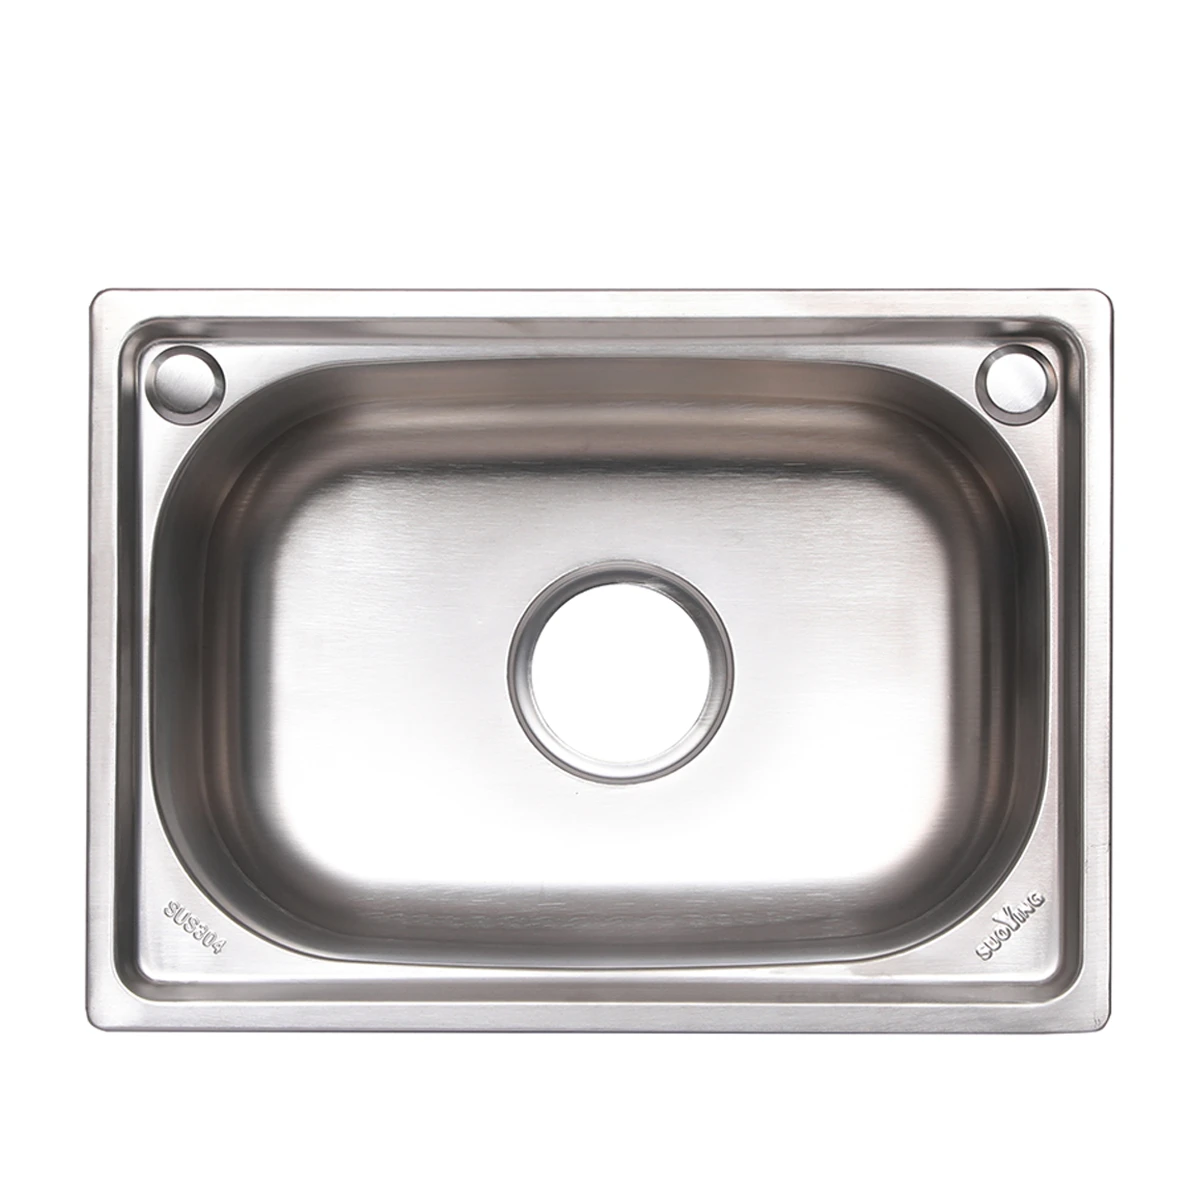 Cheap and good quality   Stainless Steel 304 Kitchen Sink